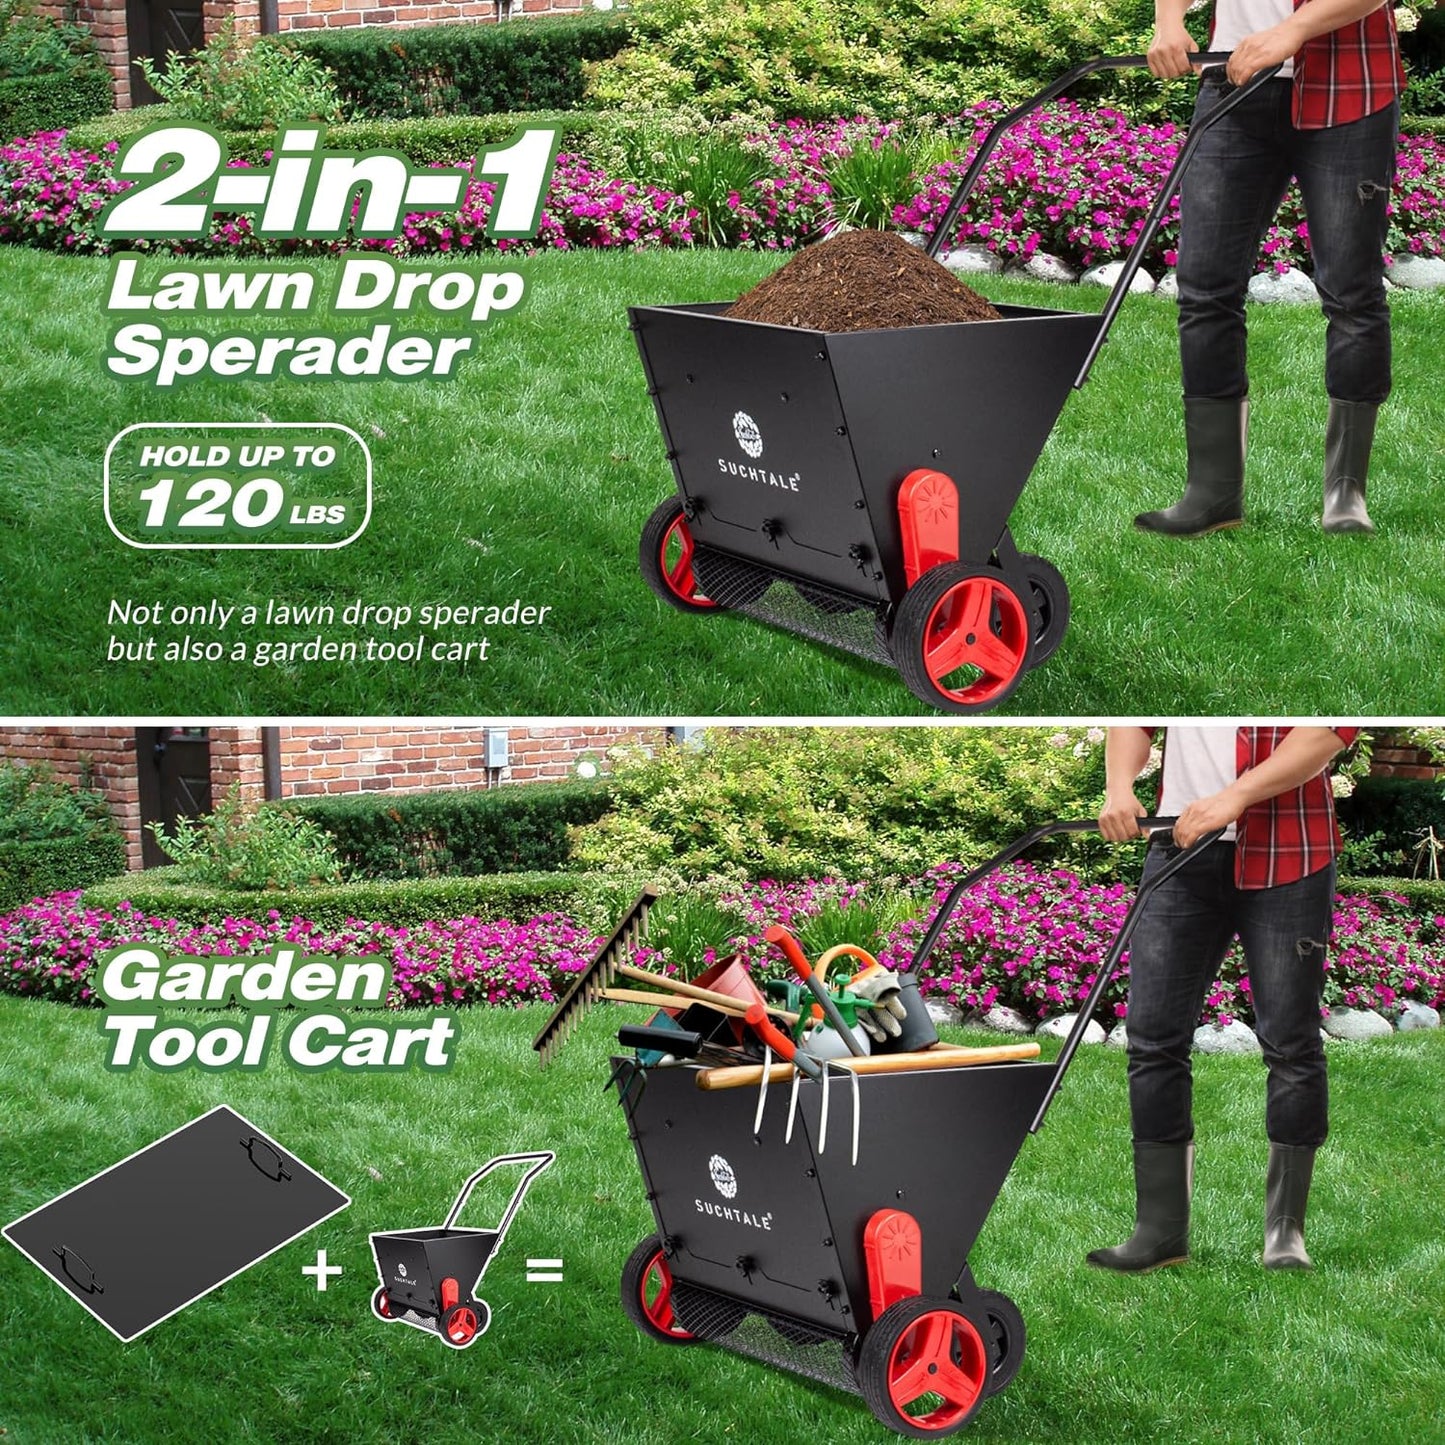 Suchtale Lawn Drop Spreader, Compost Spreader, Peat Moss Spreader Push-Type Fertilizer Drop Spreaders with Rotate Blades, Push Garden Seeder with Adjustable Drop Rate Metal Mesh Basket for